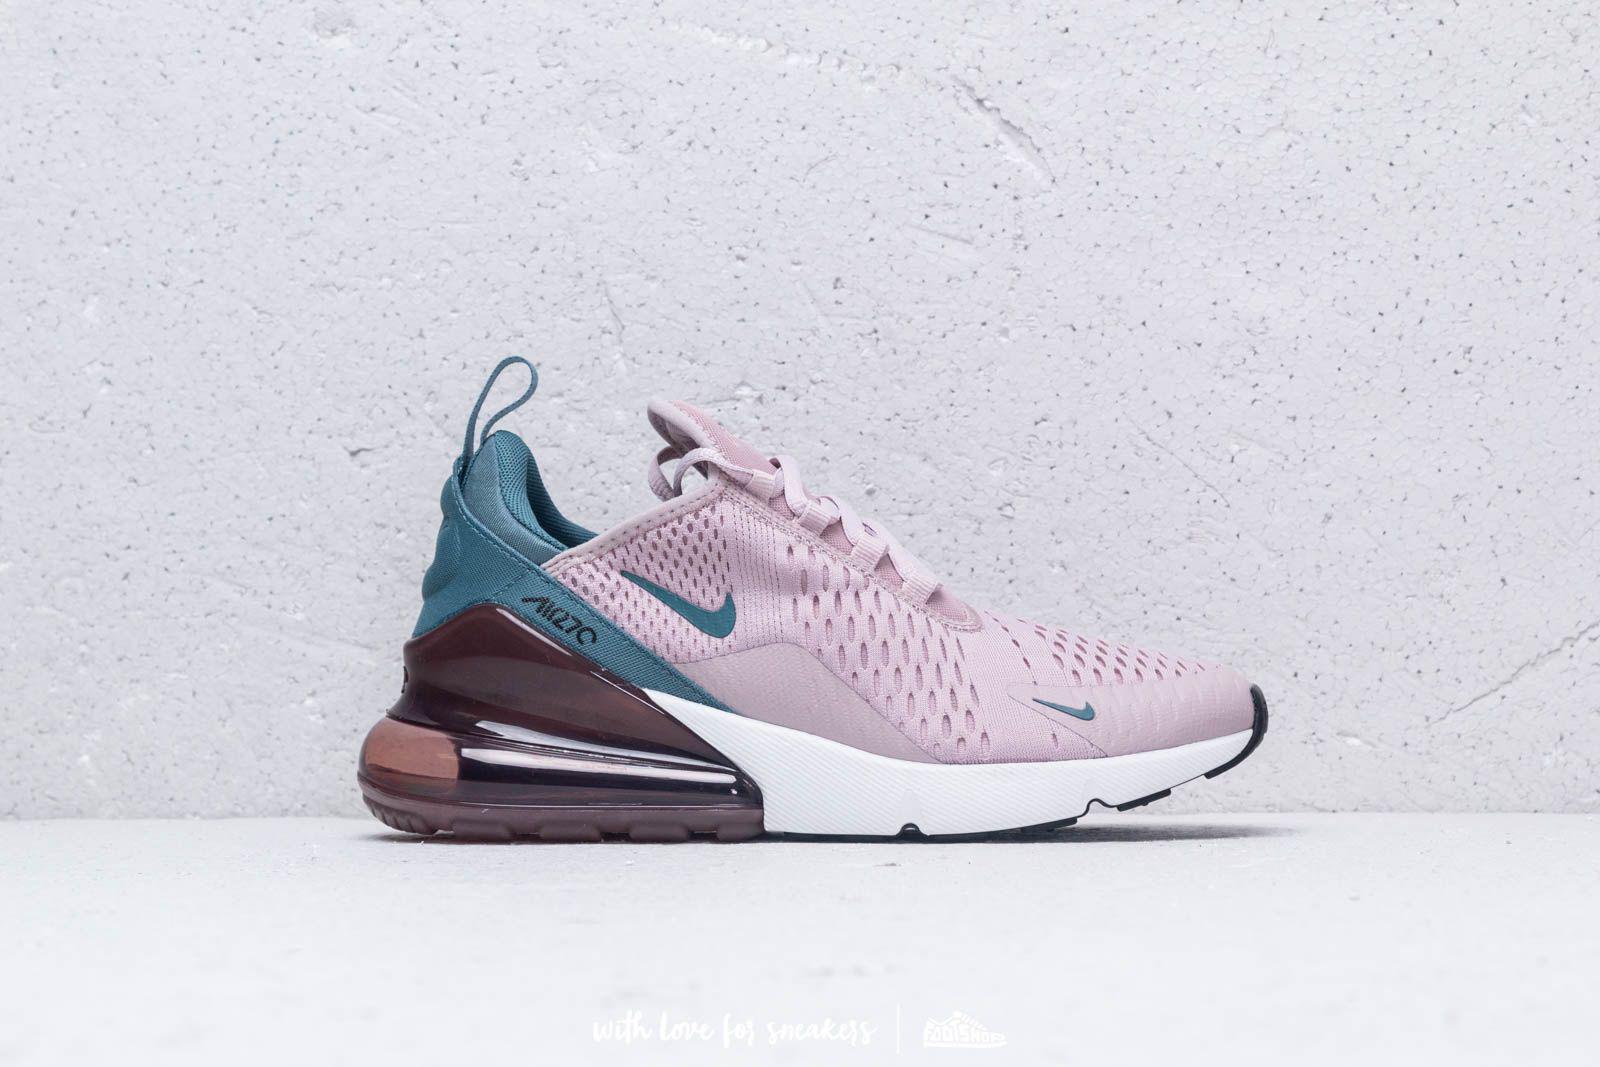 Nike Rubber W Air Max 270 Particle Rose/ Celestial Teal - Lyst